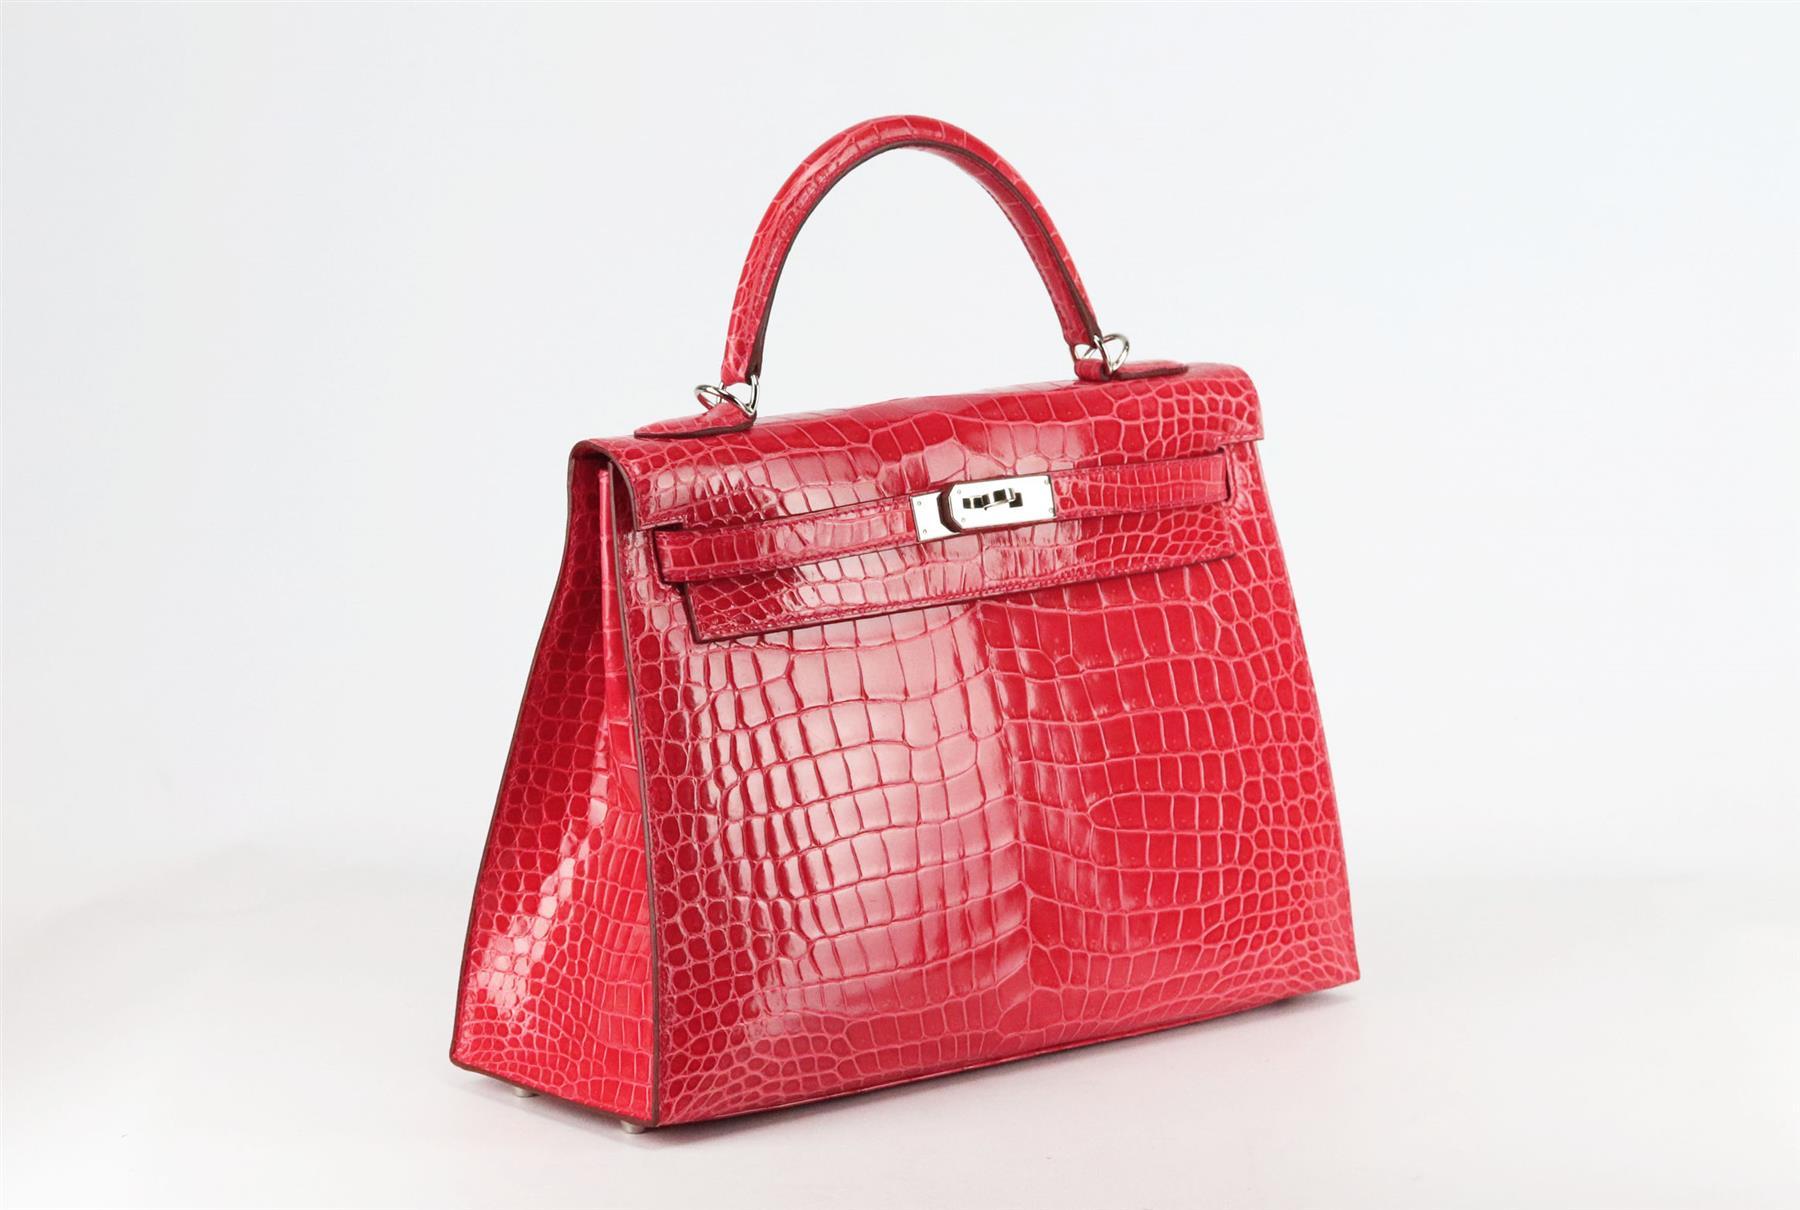 Hermès 2015 Kelly Sellier 32cm Porosus Crocodile Leather Bag In Excellent Condition For Sale In London, GB